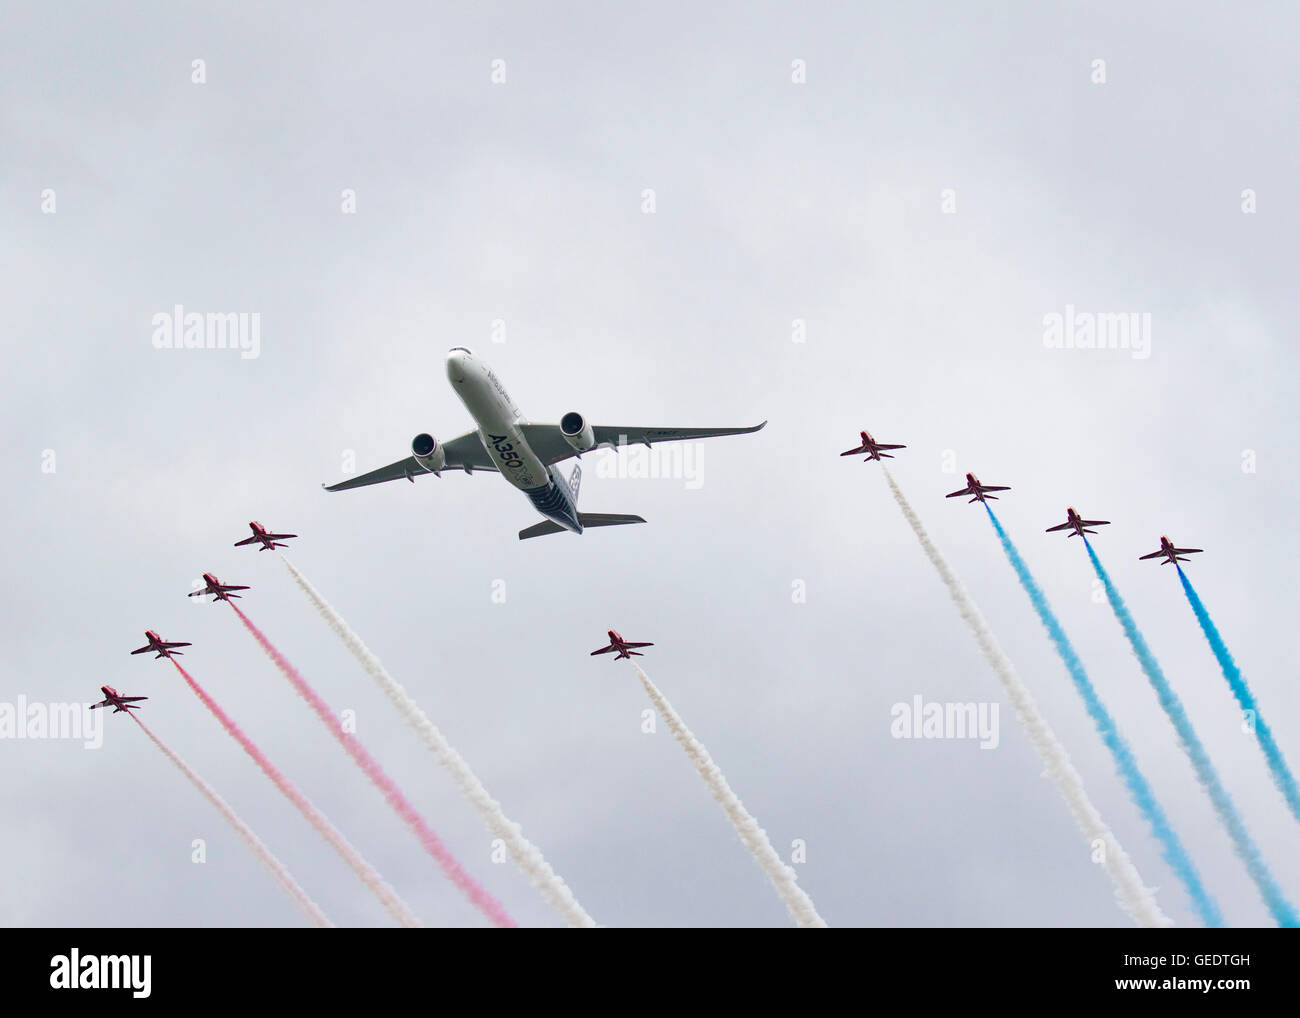 The Airbus A350 jet airliner flying at the 2016 Farnborough International Airshow Stock Photo